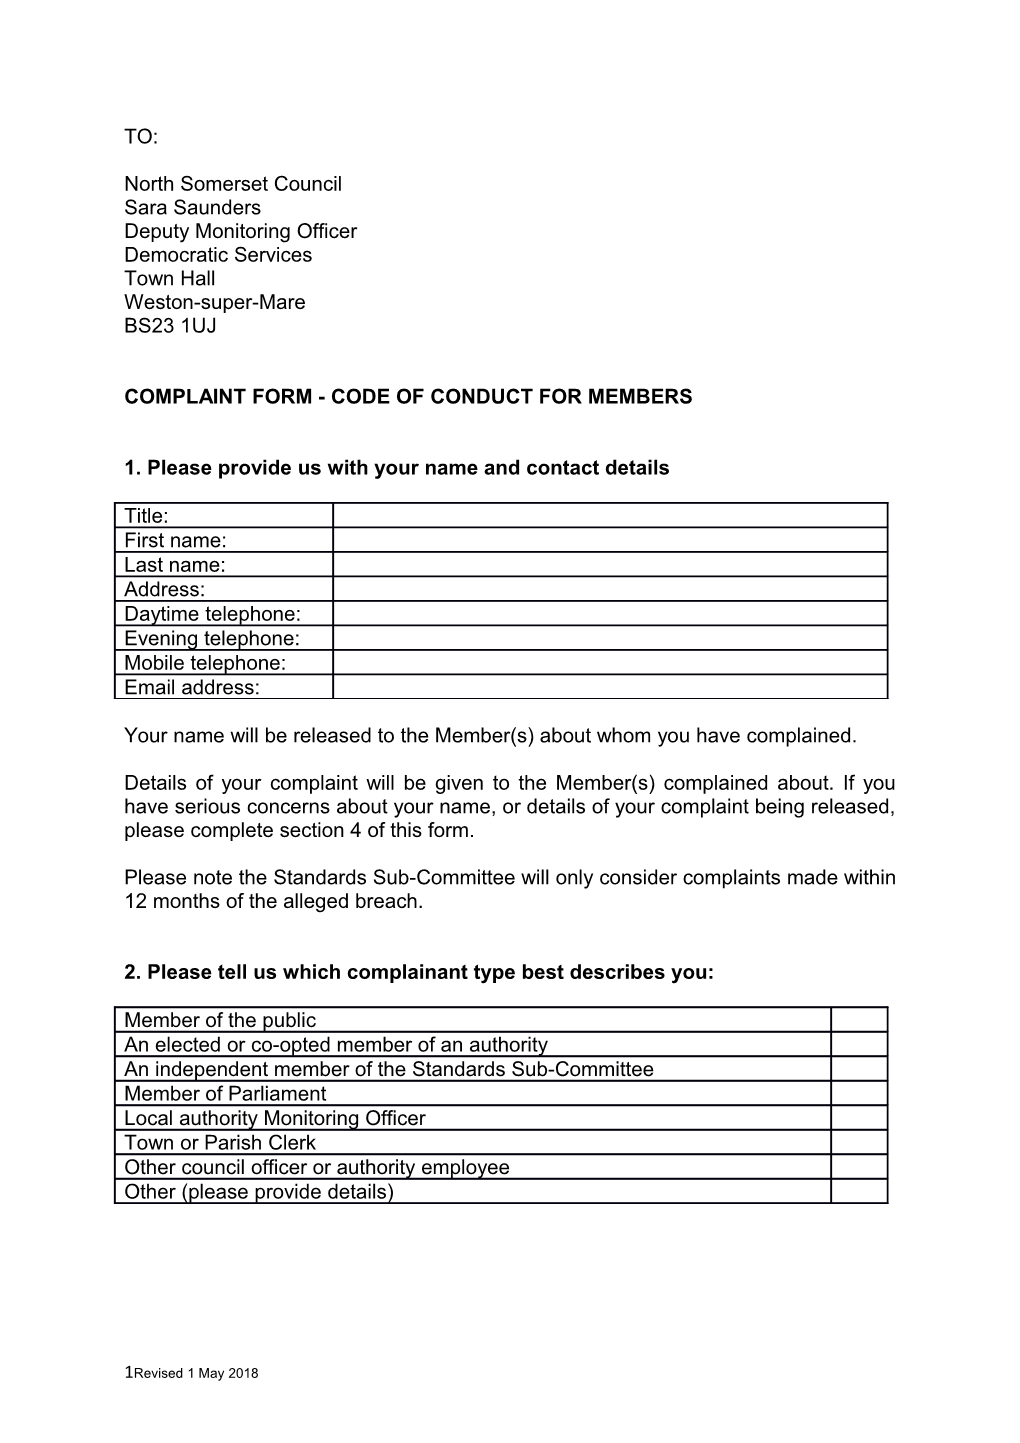 Complaint Form - Code of Conduct for Members